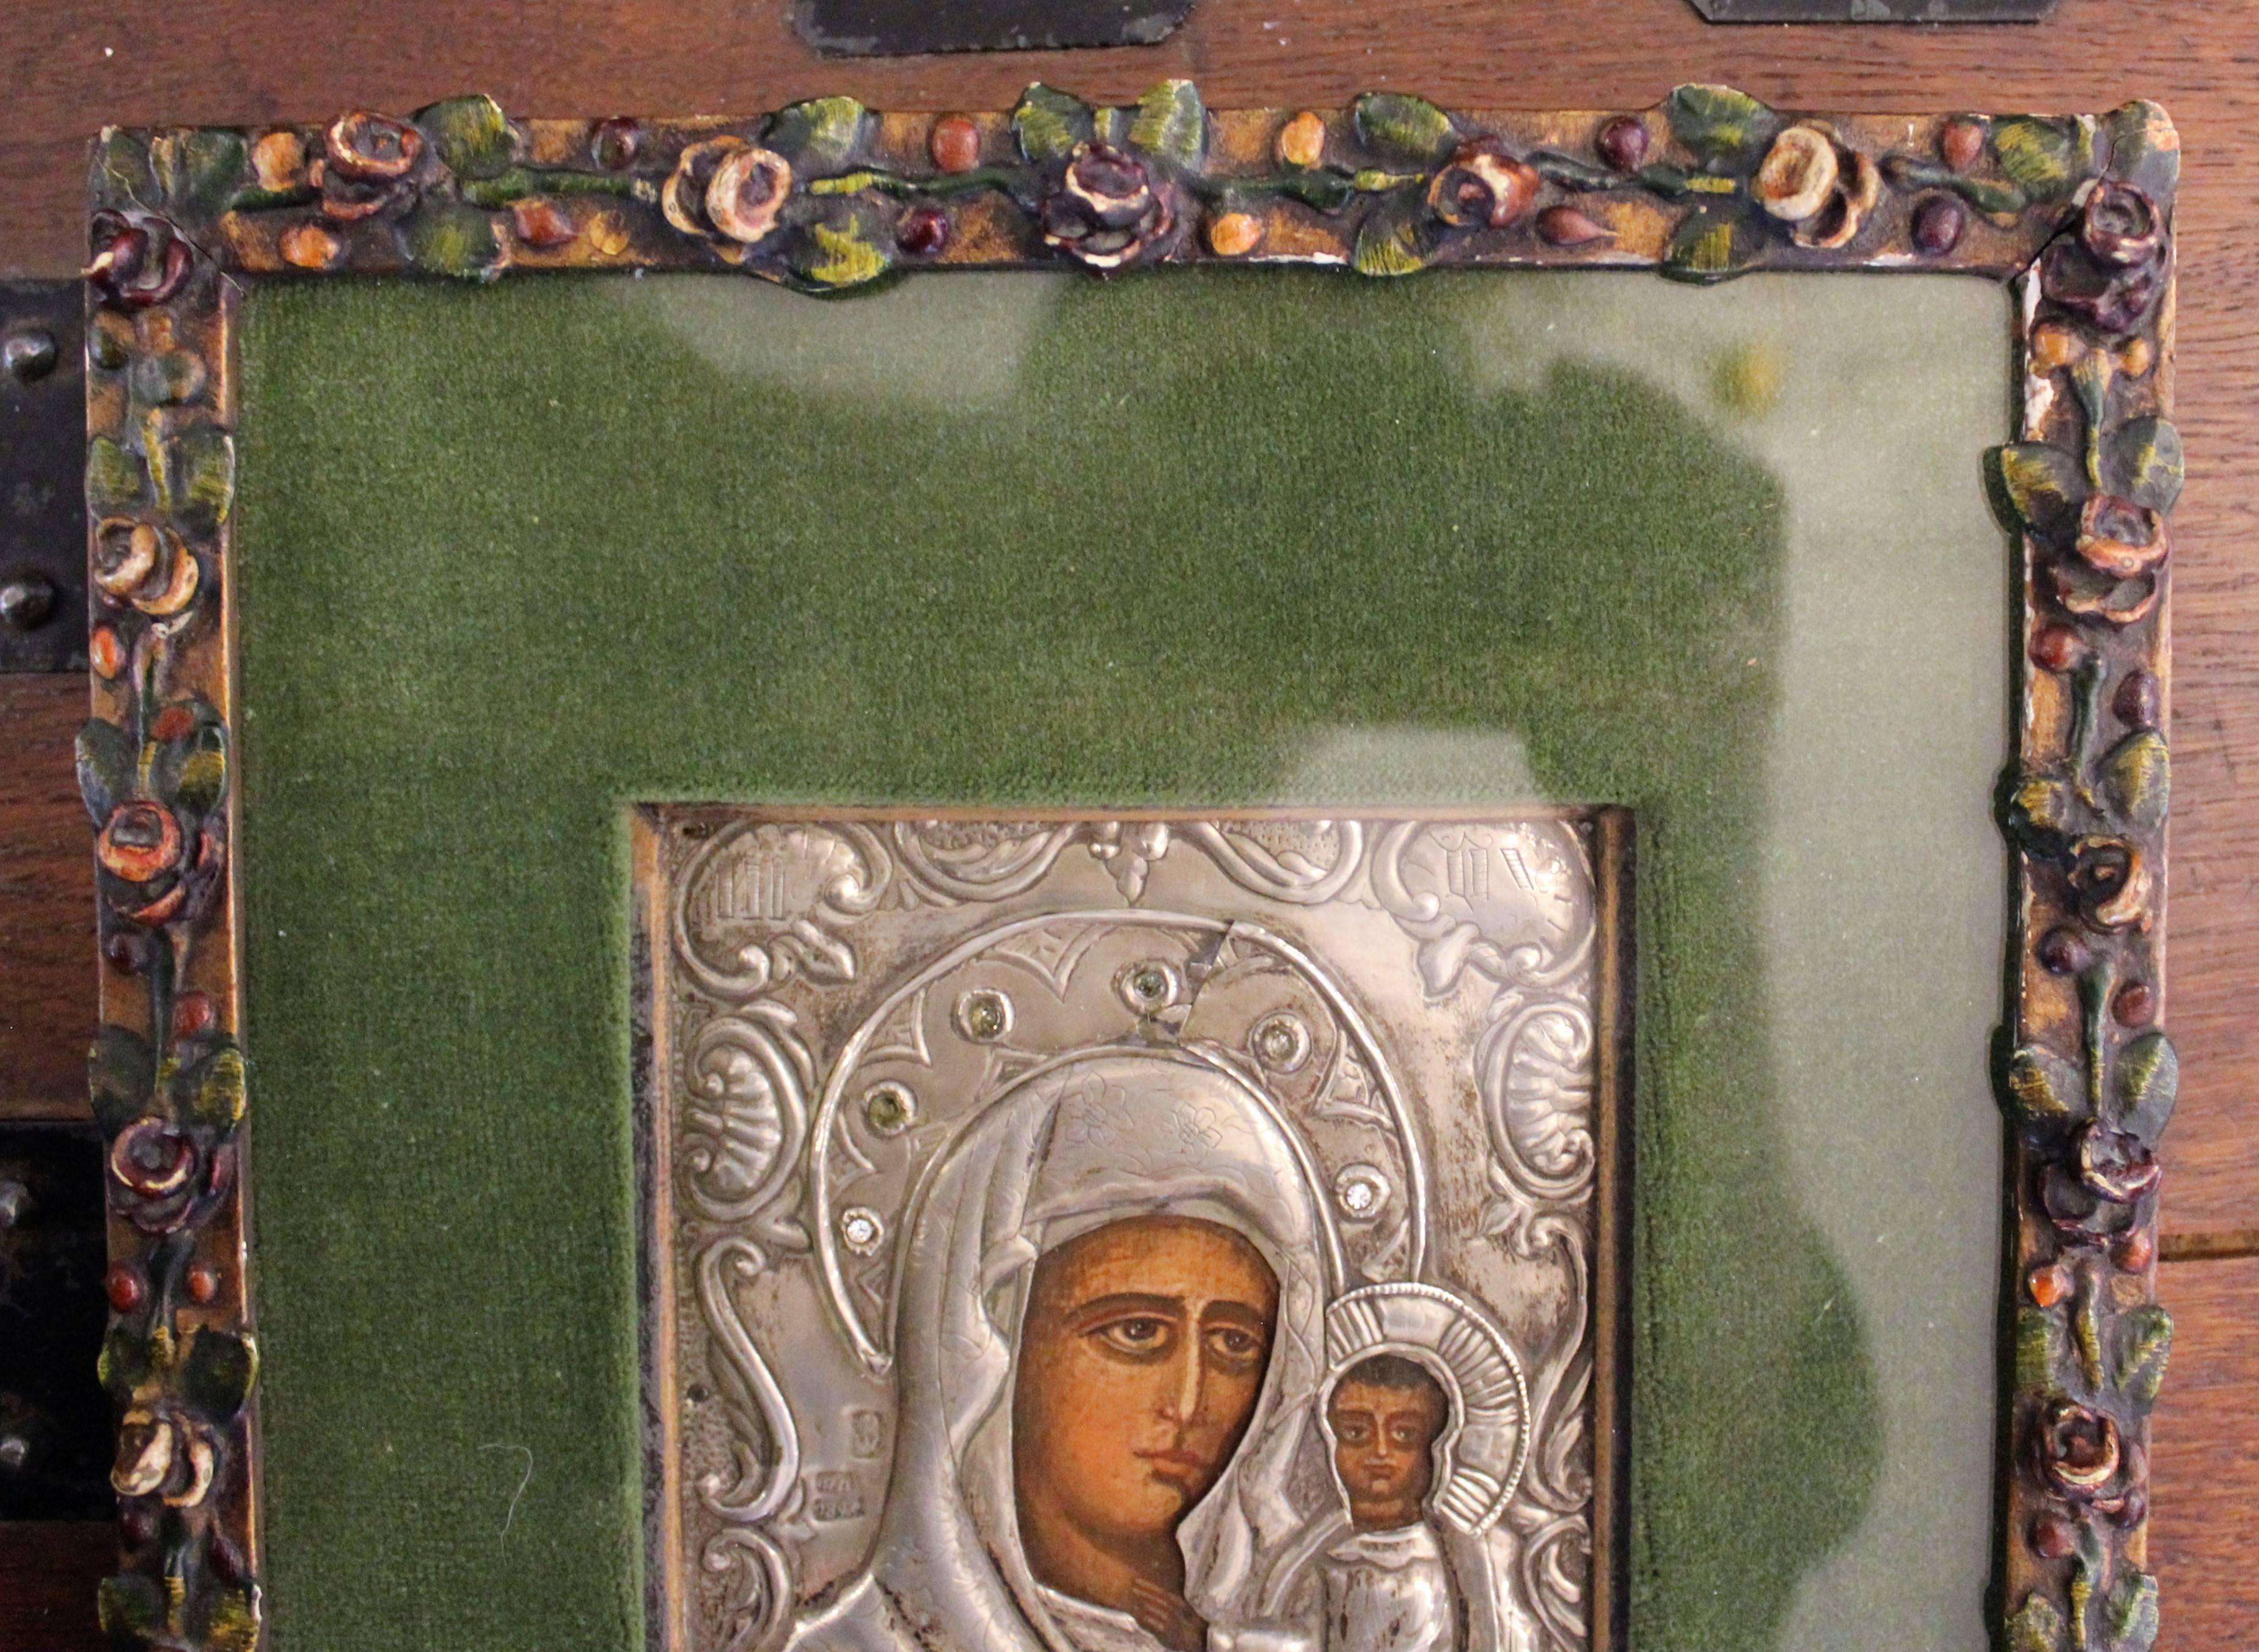 19th century Russian painting of the Virgin Mary and Jesus Christ with finely detailed, hand-hammered and silver hallmarked oklad embellished with semi-precious stones.
Size:
Without Frame: 5.75